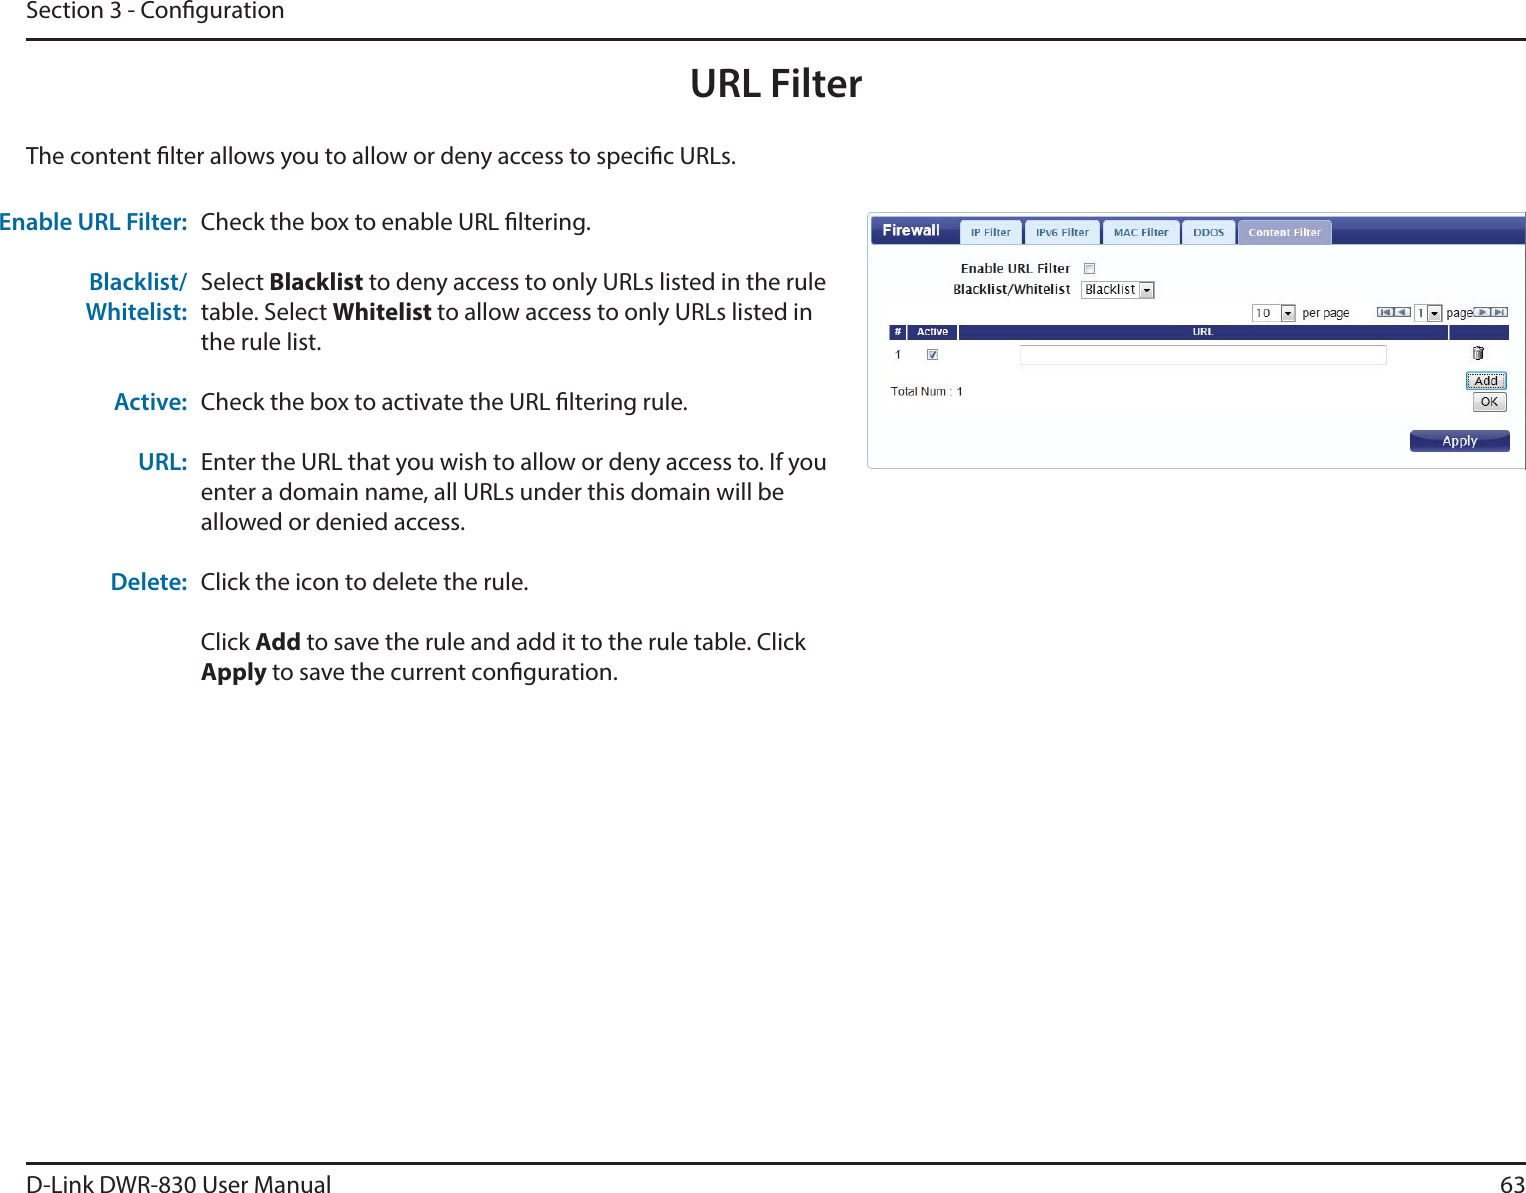 D-Link DWR-830 User Manual 63Section 3 - CongurationURL FilterCheck the box to enable URL ltering.Select Blacklist to deny access to only URLs listed in the rule table. Select Whitelist to allow access to only URLs listed in the rule list. Check the box to activate the URL ltering rule. Enter the URL that you wish to allow or deny access to. If you enter a domain name, all URLs under this domain will be allowed or denied access.Click the icon to delete the rule. Click Add to save the rule and add it to the rule table. Click Apply to save the current conguration. Enable URL Filter:Blacklist/Whitelist:Active:URL:Delete:The content lter allows you to allow or deny access to specic URLs.